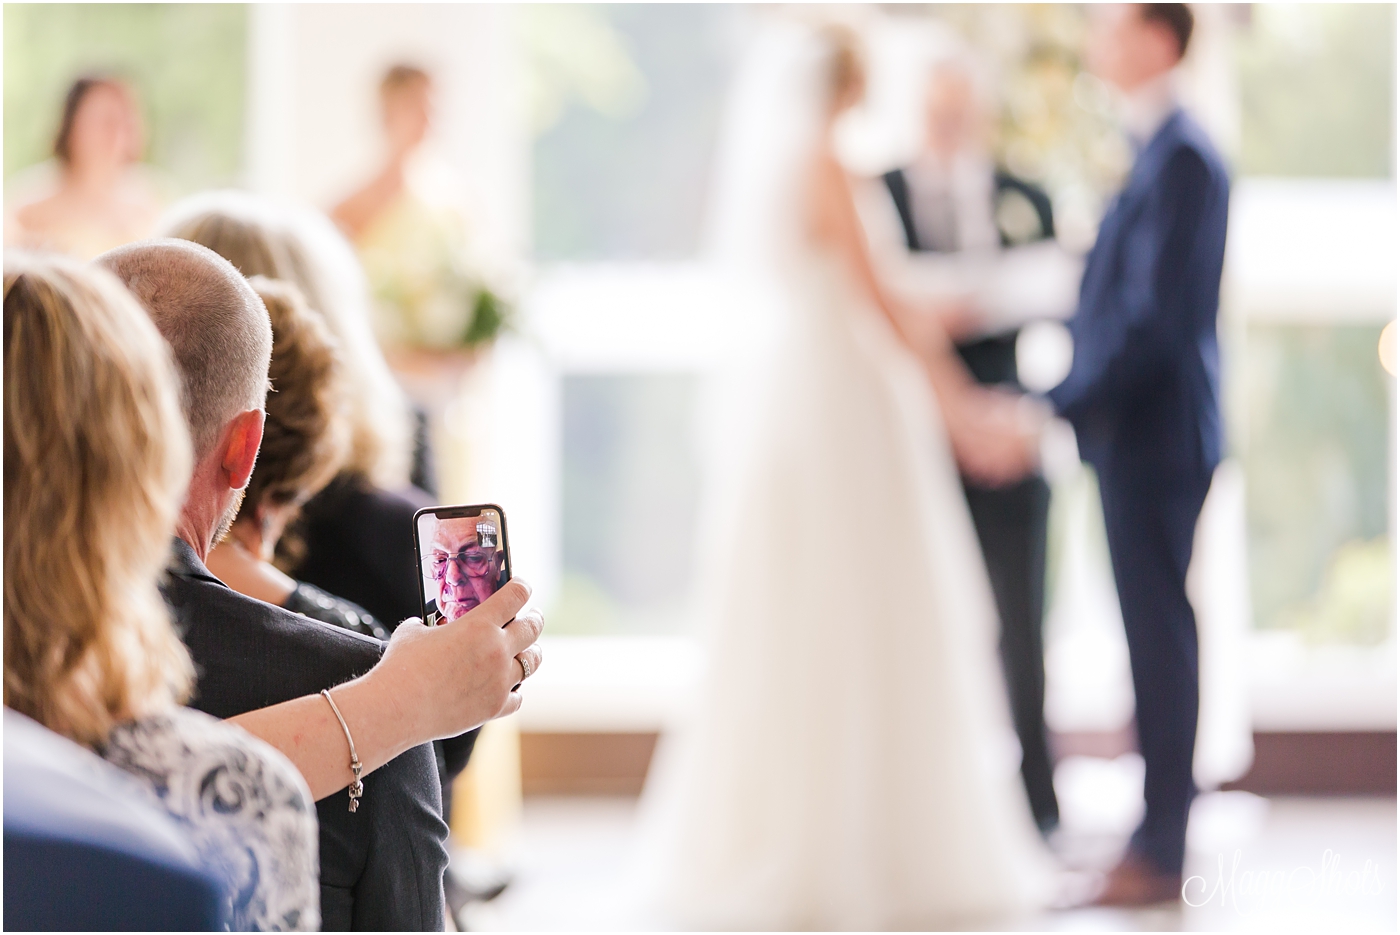 MaggShots Photography, DFW Wedding Photographer, Firefly Gardens Wedding Photographer, Firefly Gardens, Wedding Photographer, Firefly Gardens wedding, Firefly Gardens Wedding, wedding ceremony, grandfather, FaceTime attendee 